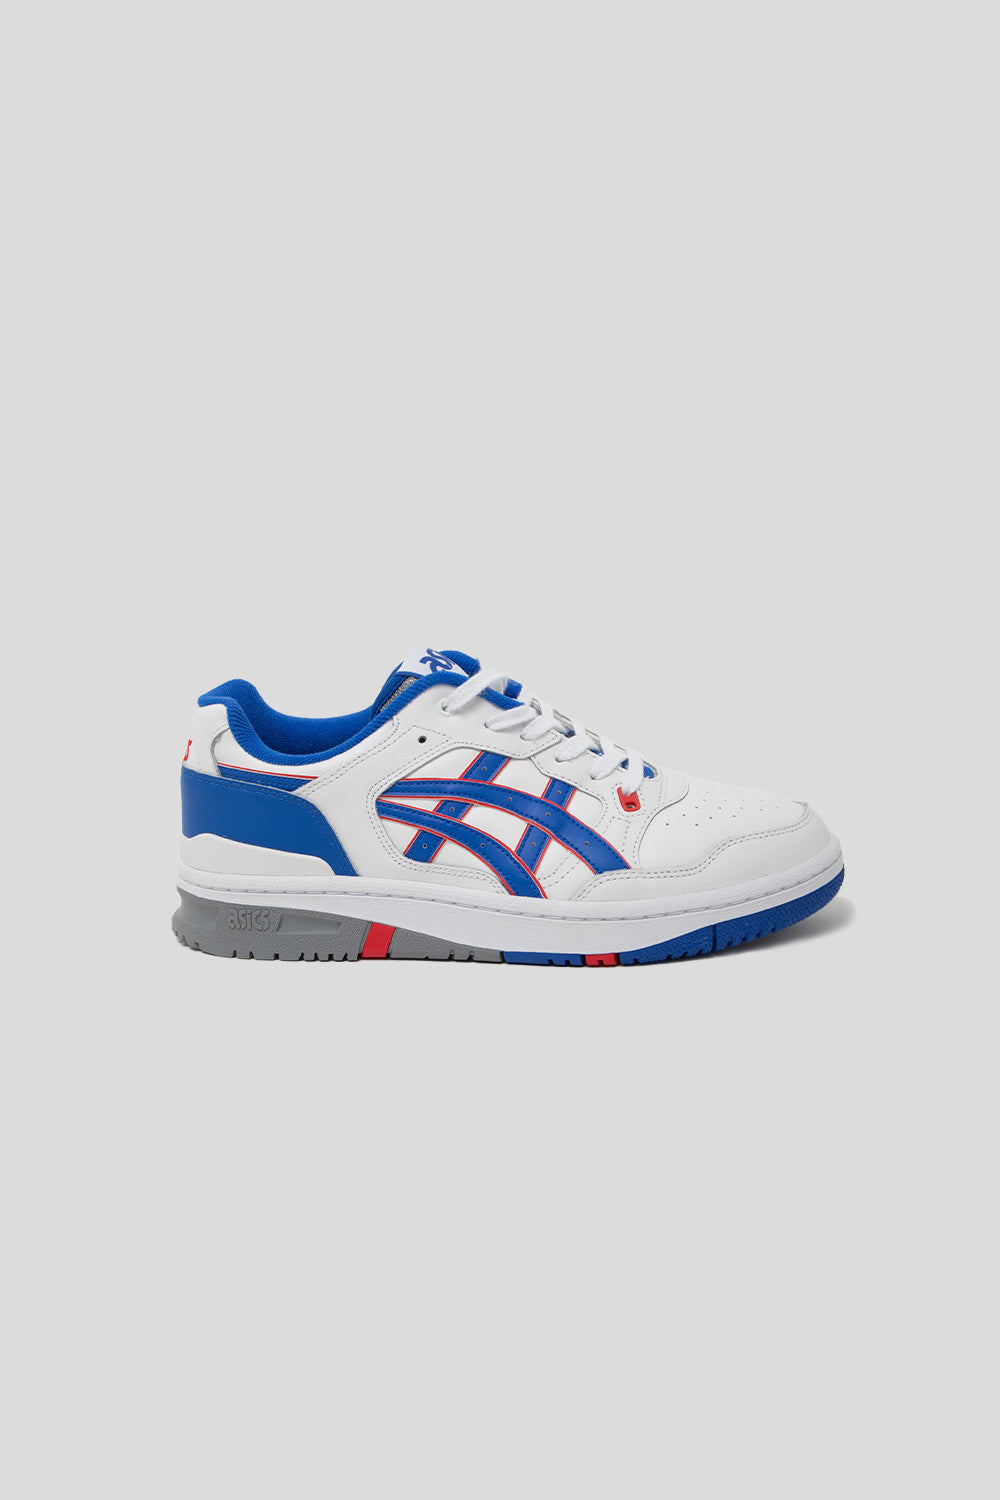 Asics EX89 Shoe in White and Illusion Blue